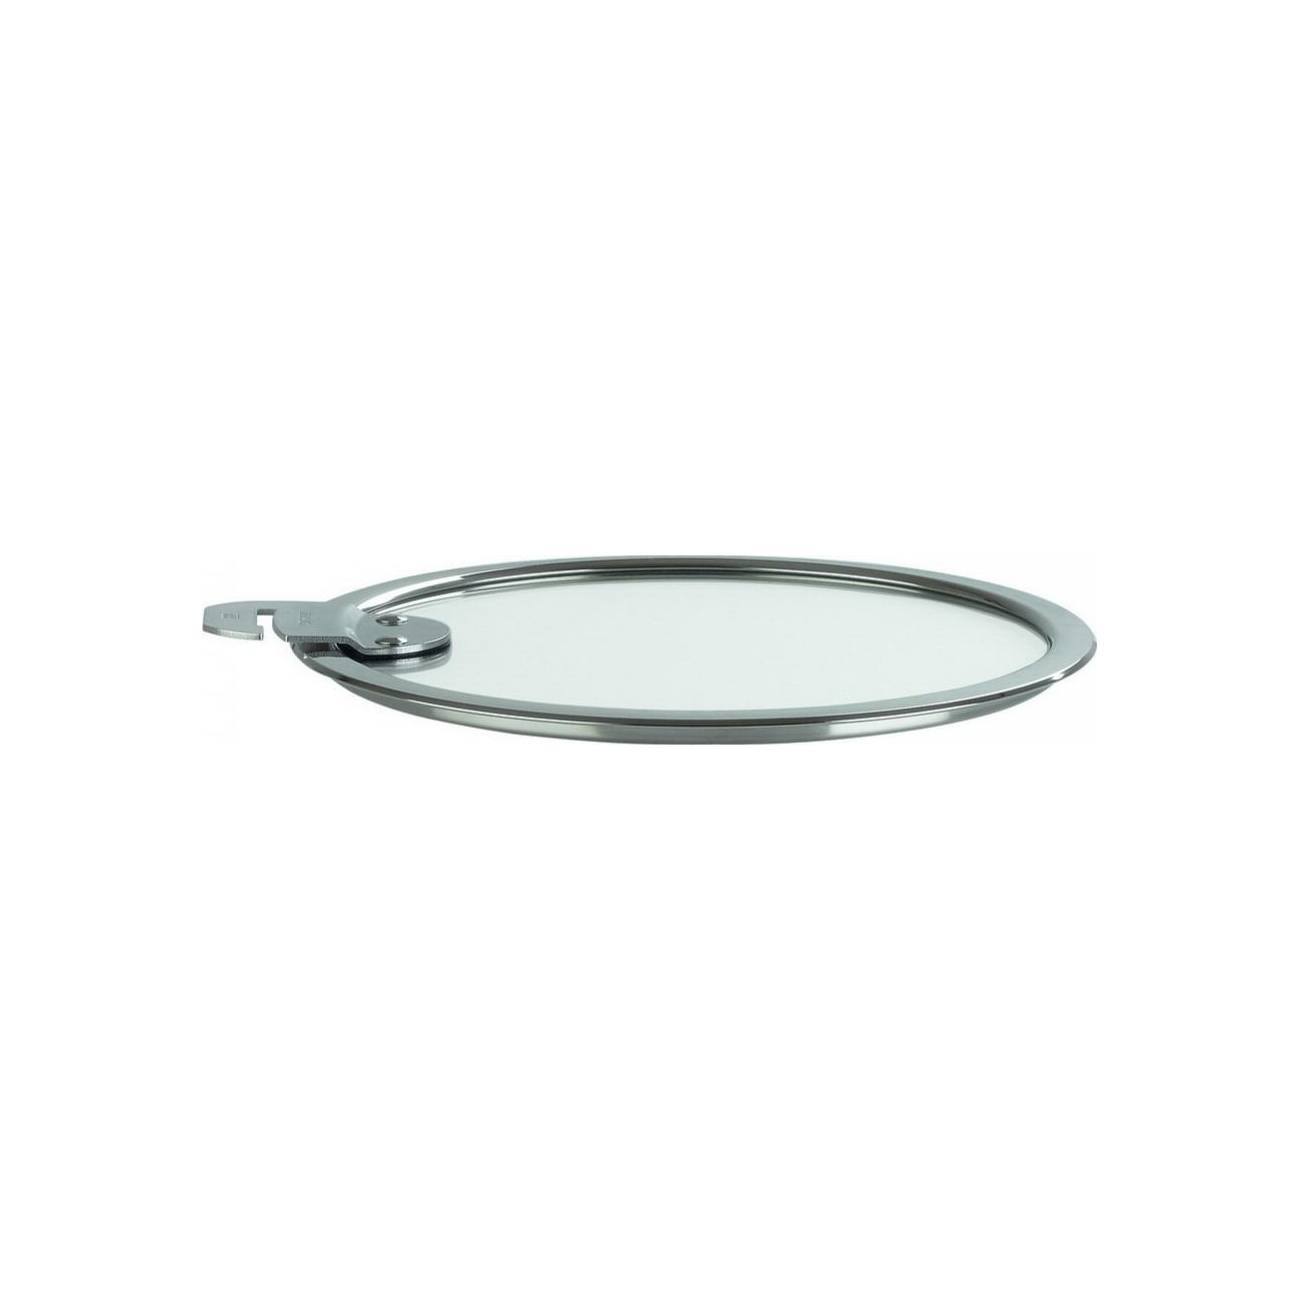 Removable strate lid 22 cm